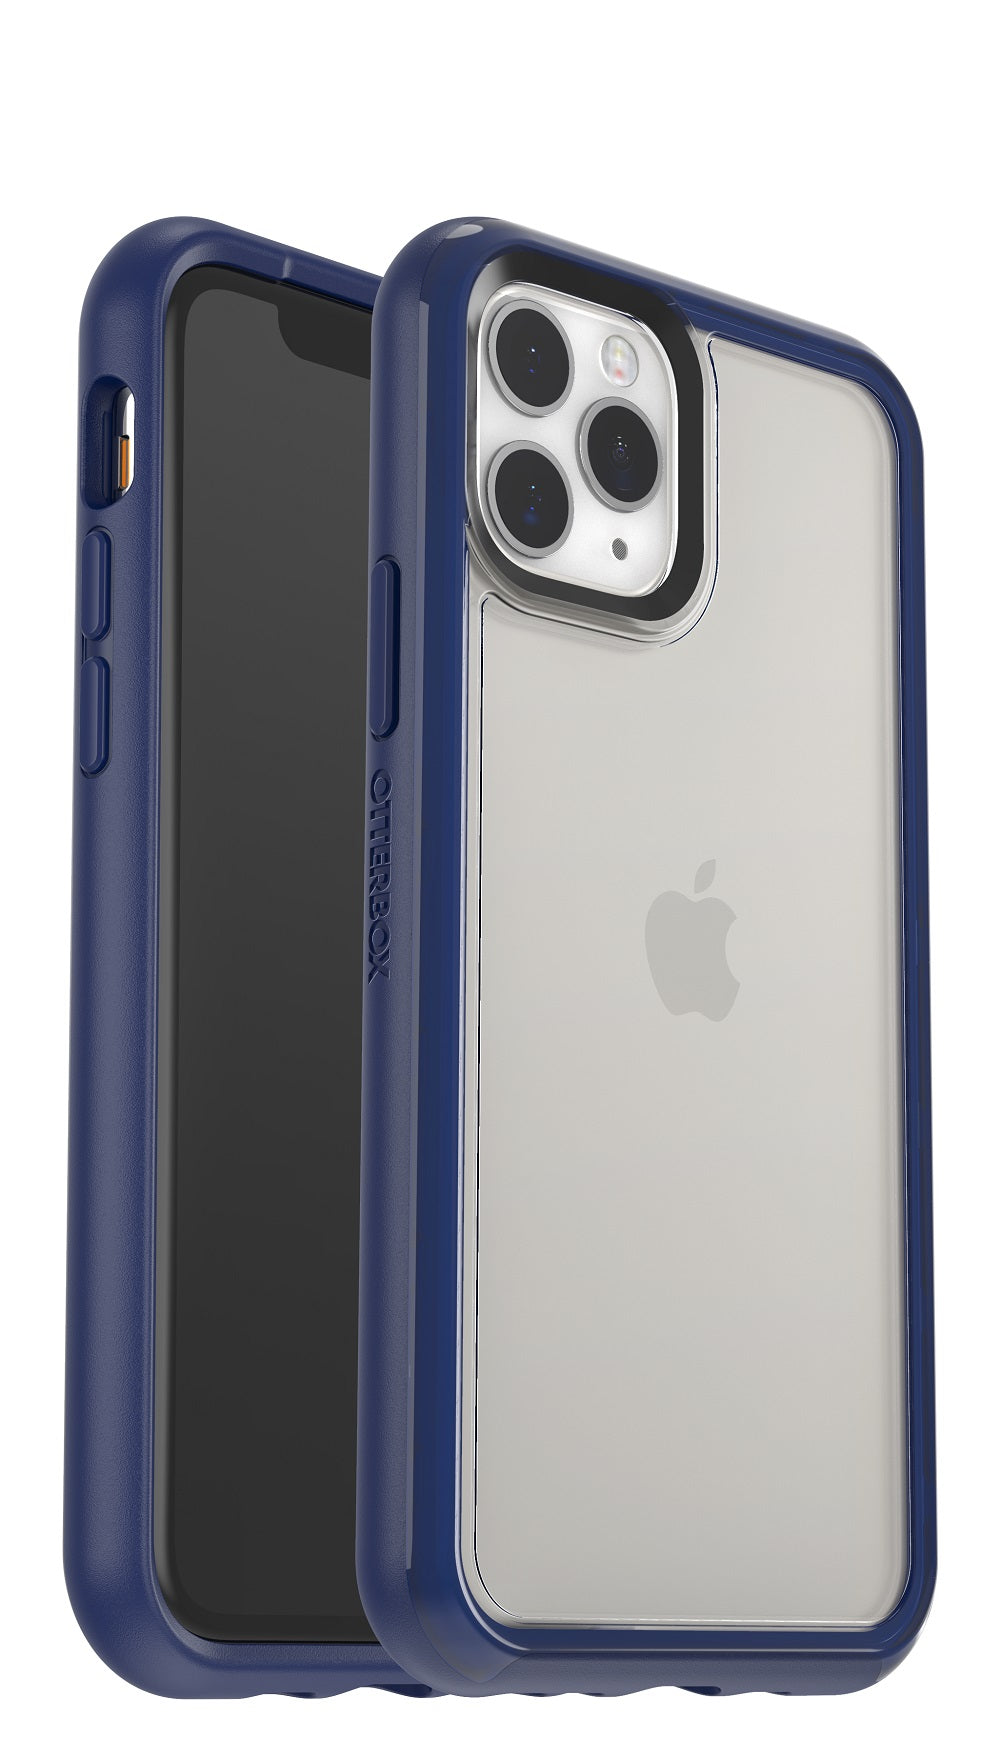 OtterBox Clear Protective Case for Apple iPhone 11 Pro - Indigo Bliss Blue (New)